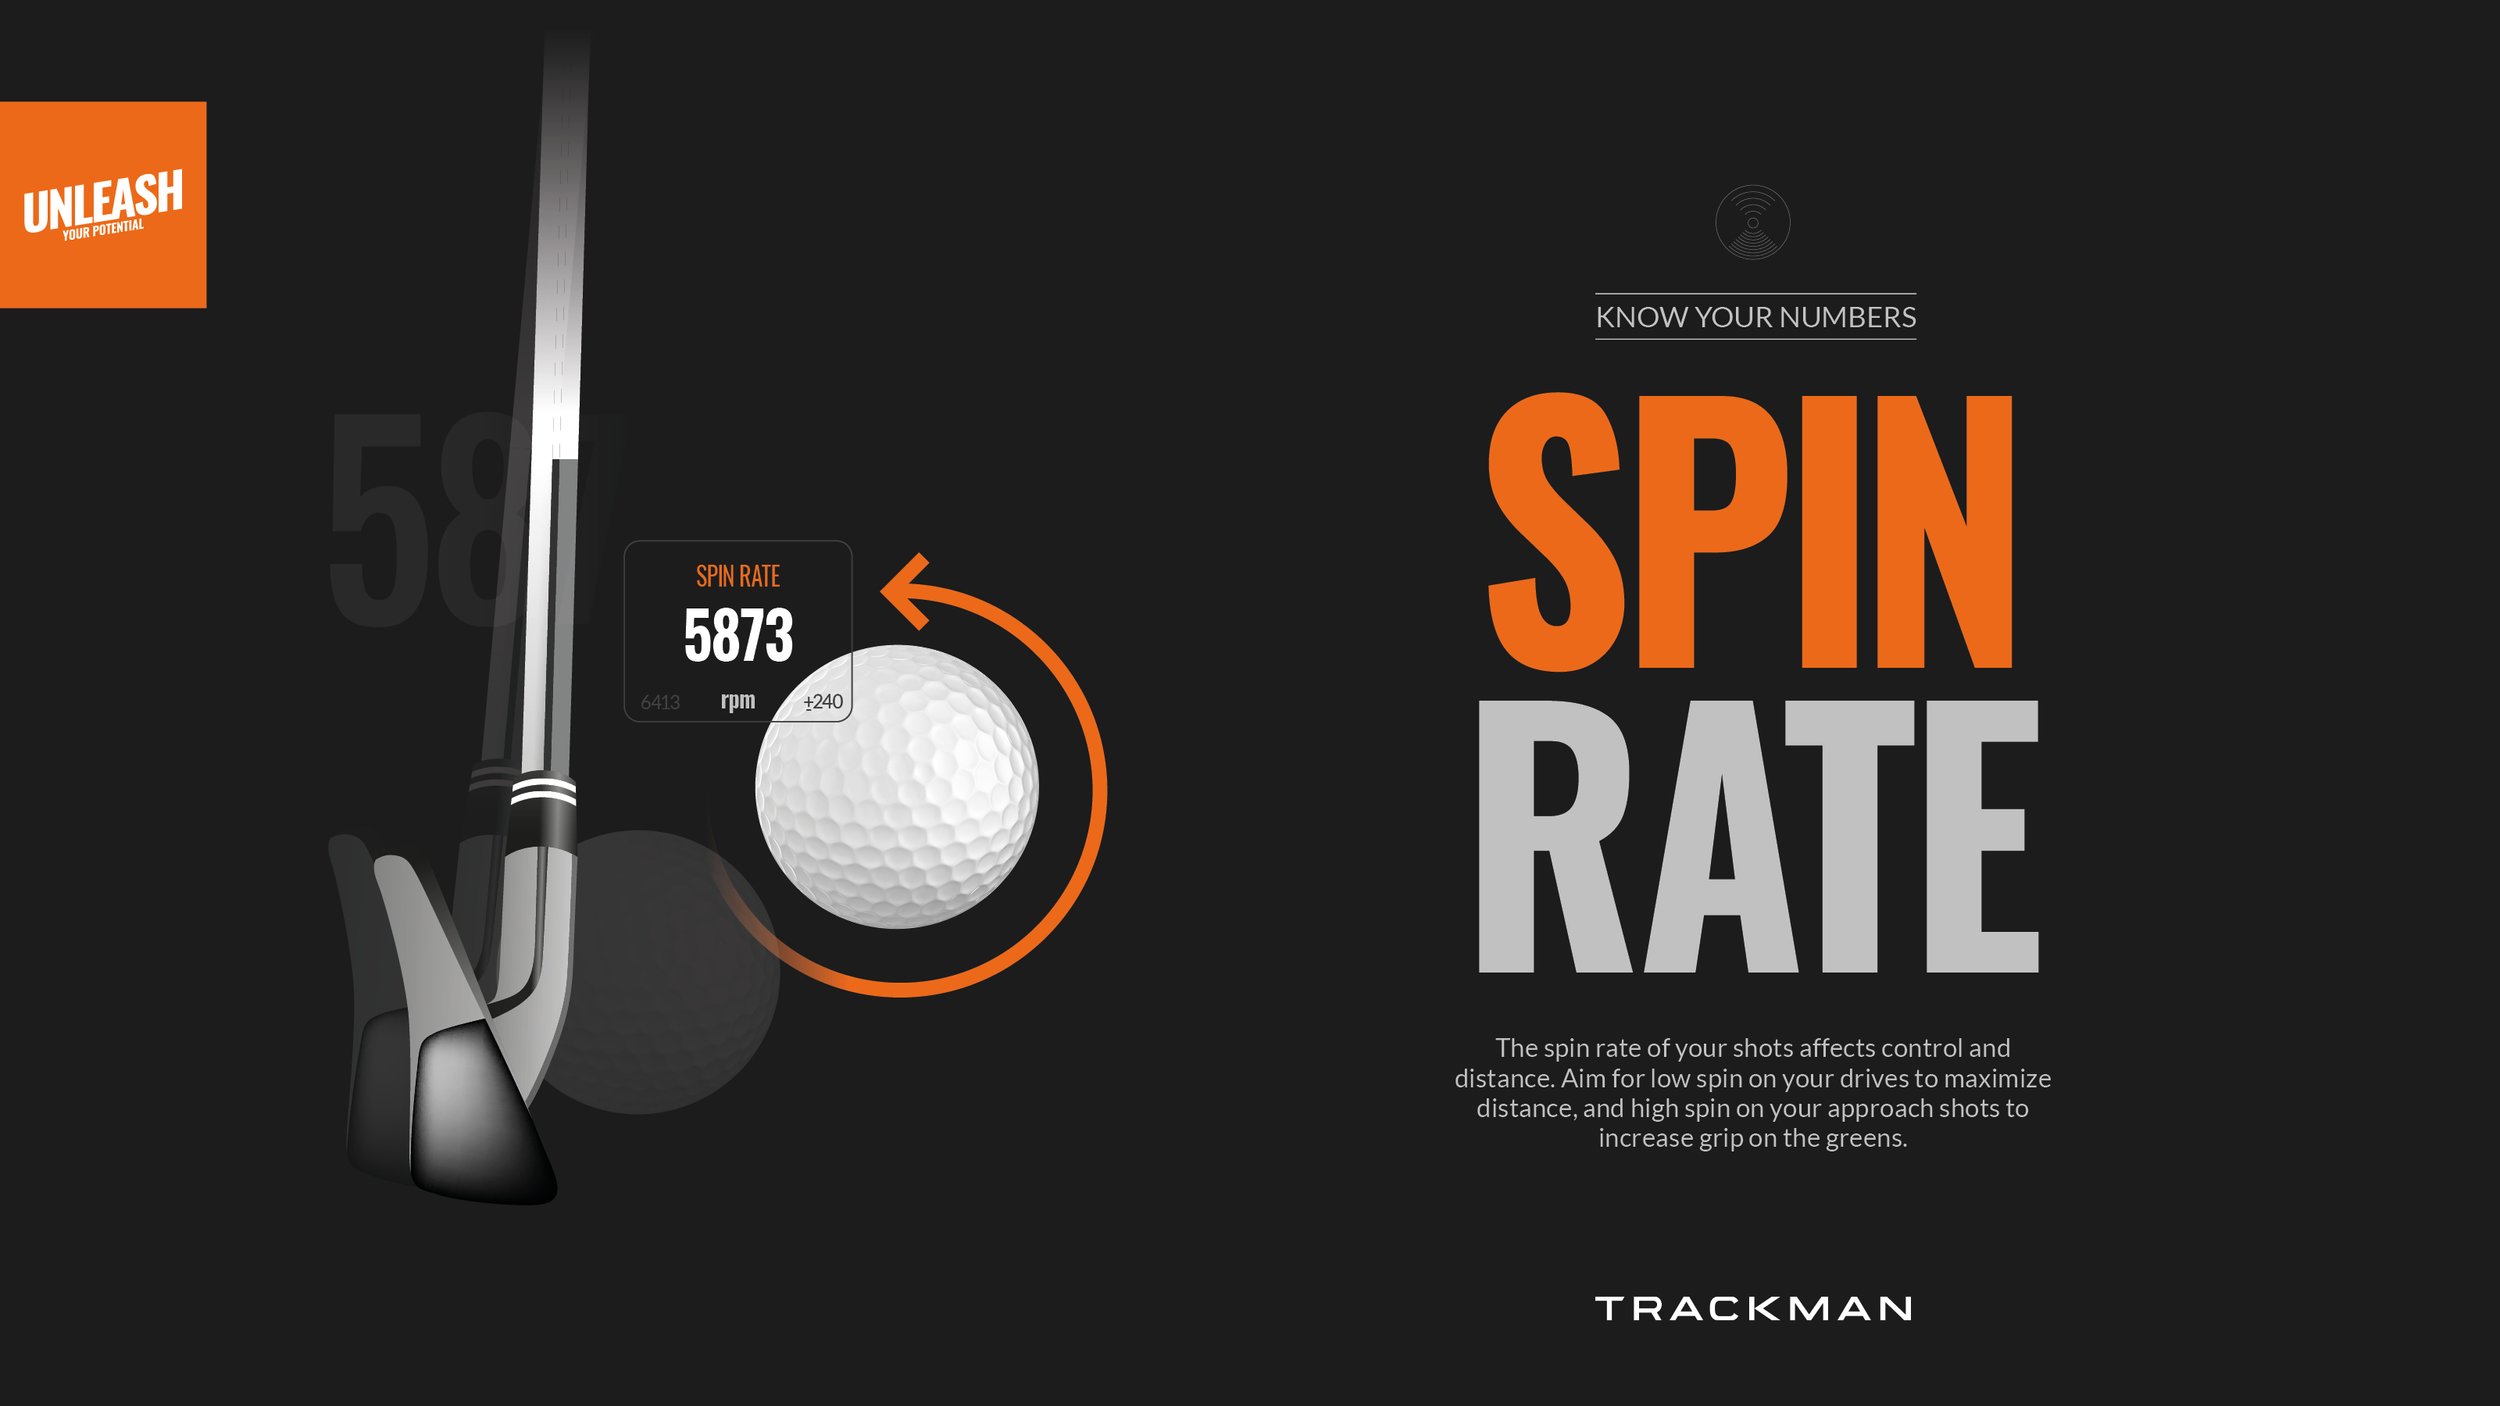 Spin Rate_screen_1920x1080px.jpg